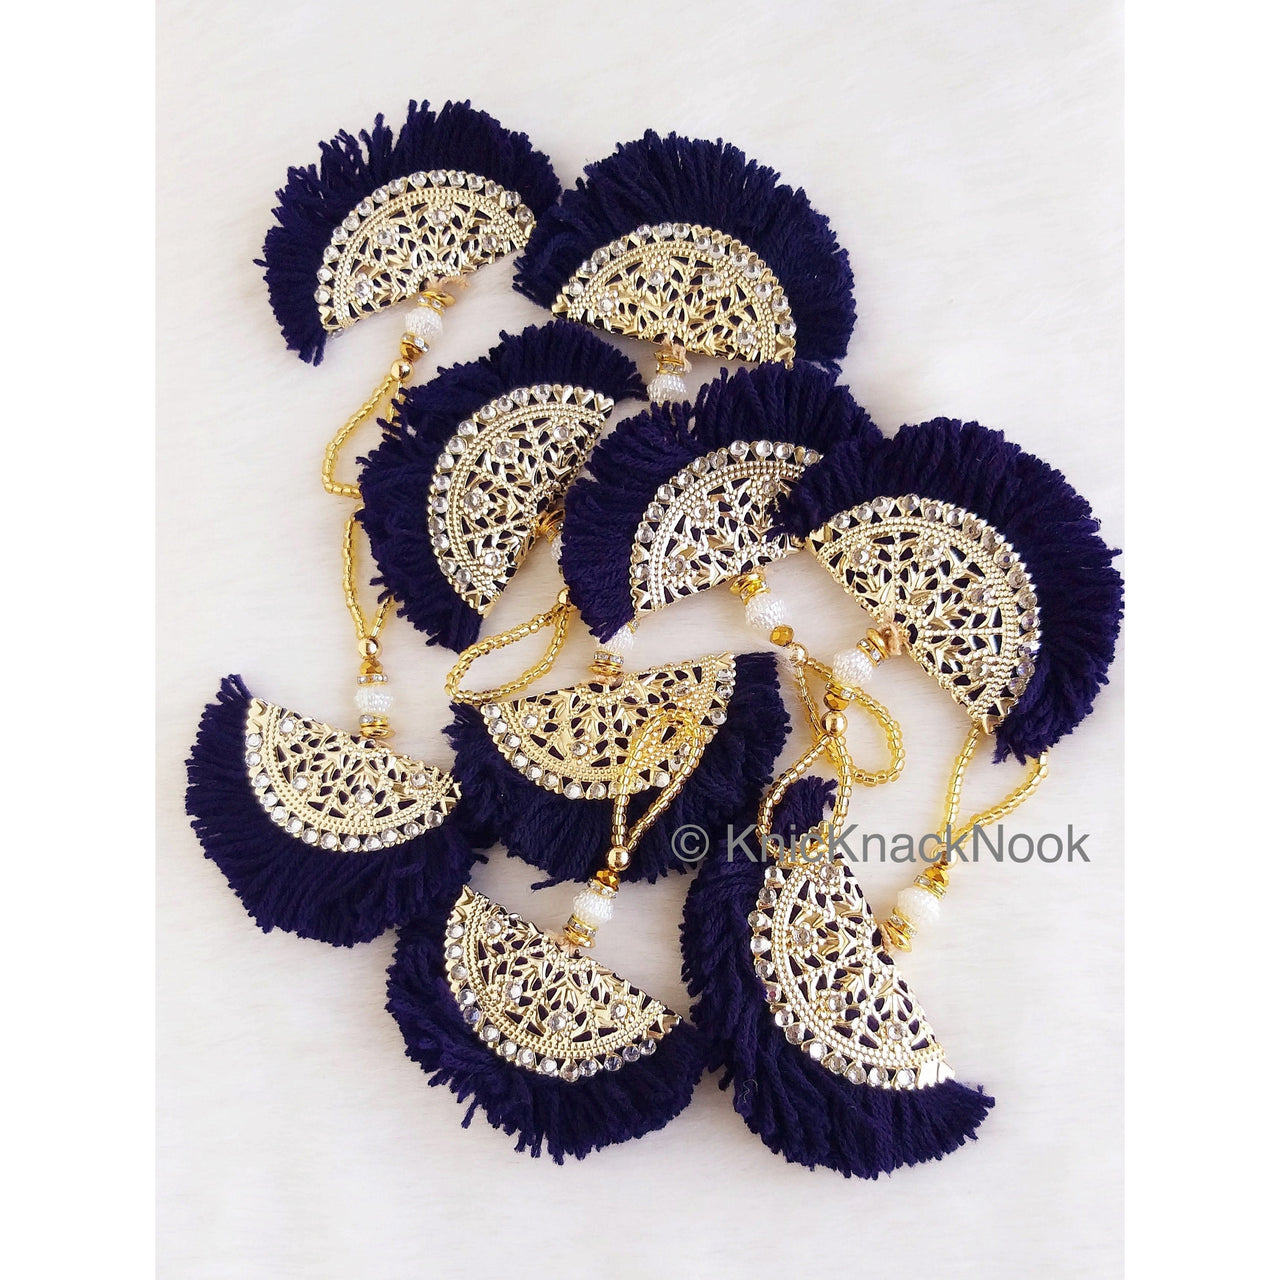 Fan Tassels With Silver and Gold Filigree Embellishments, Wool Tassels, Embellishments